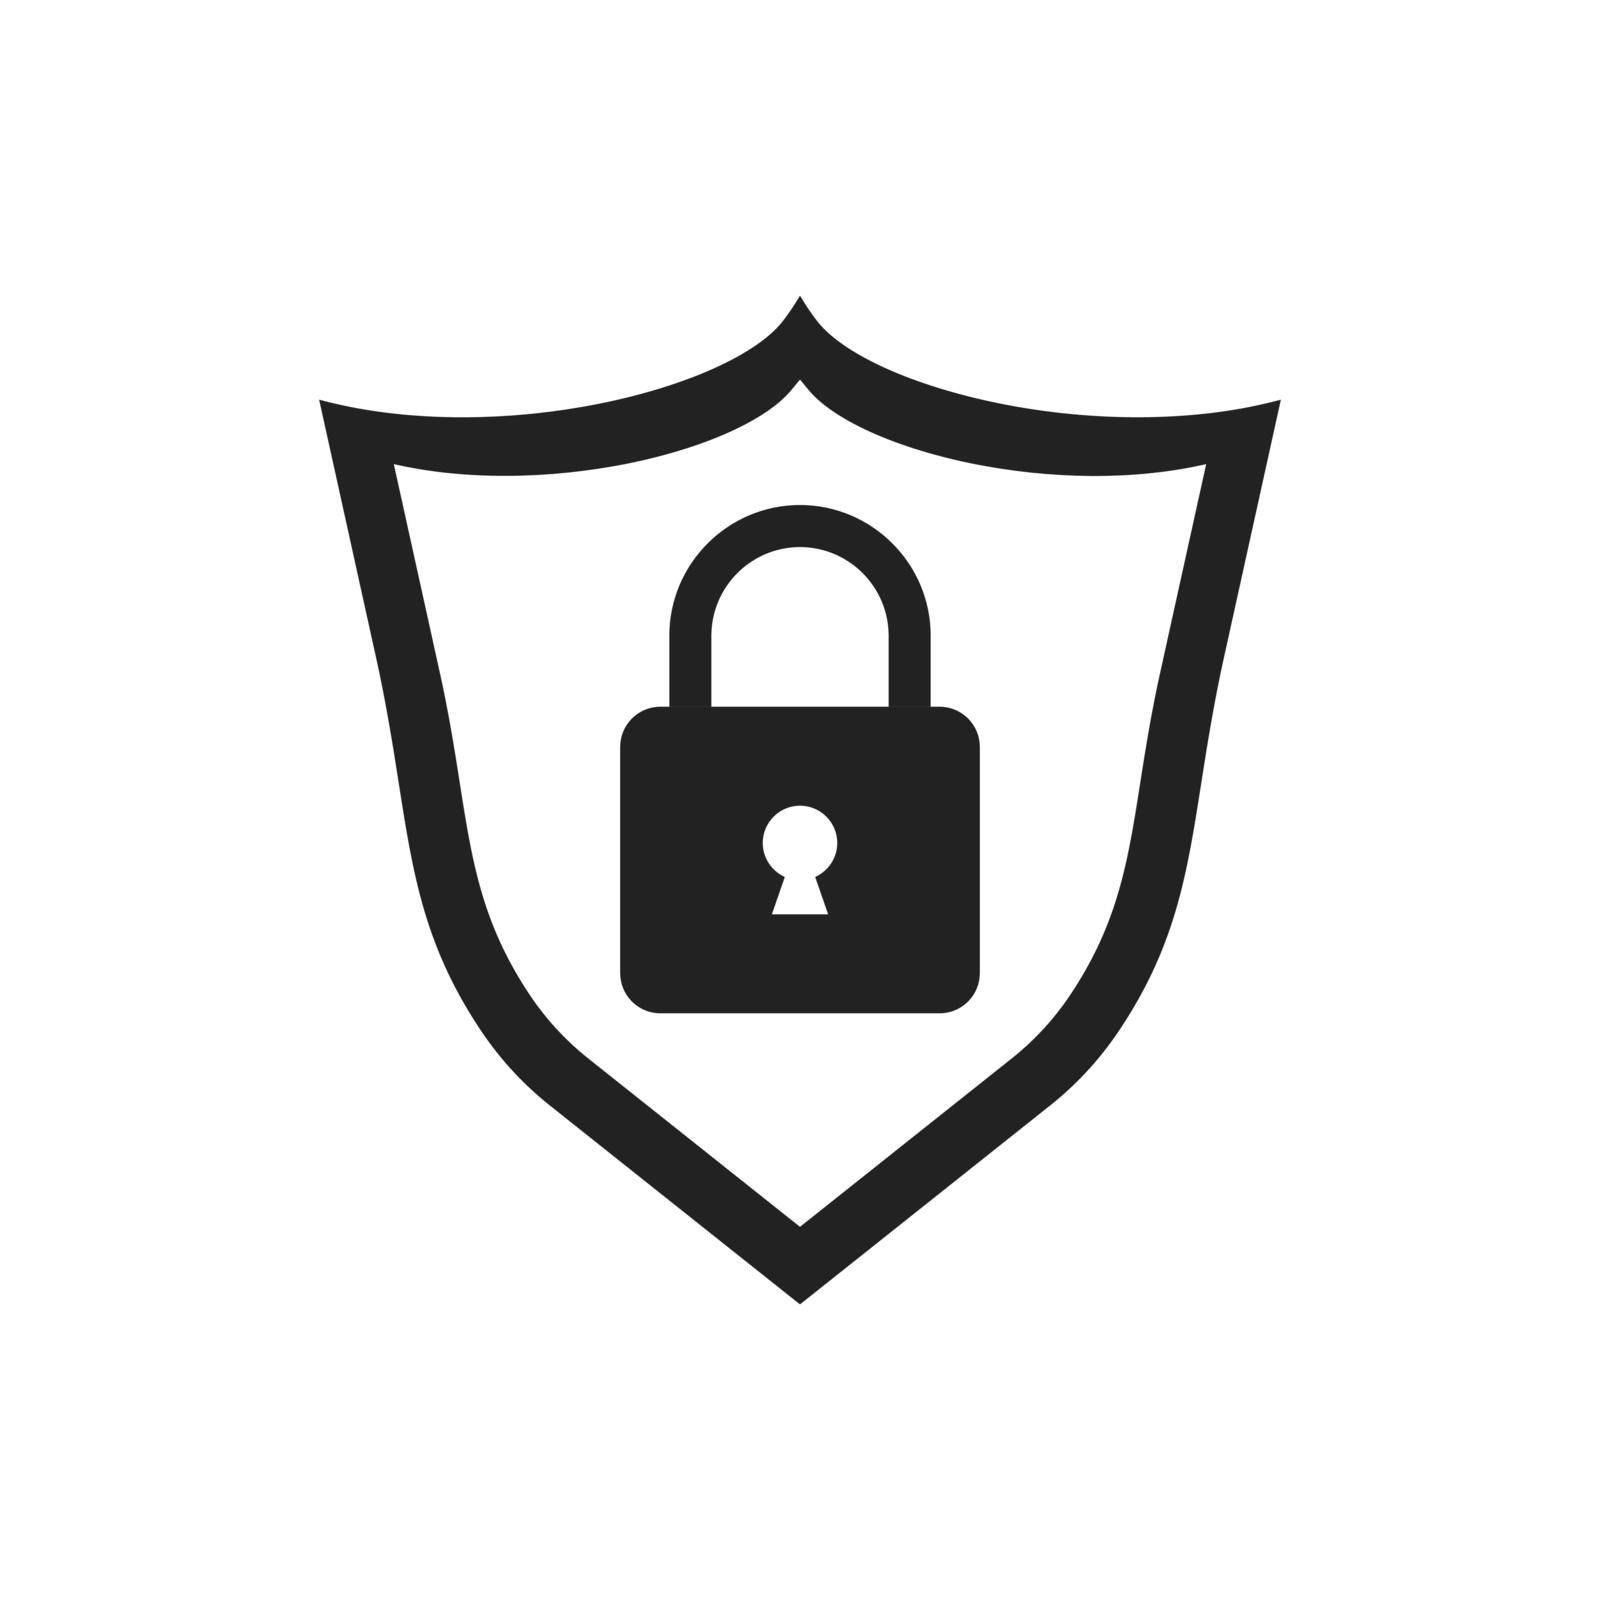 Lock with shield security icon. Vector illustration on white background. Business concept padlock pictogram.